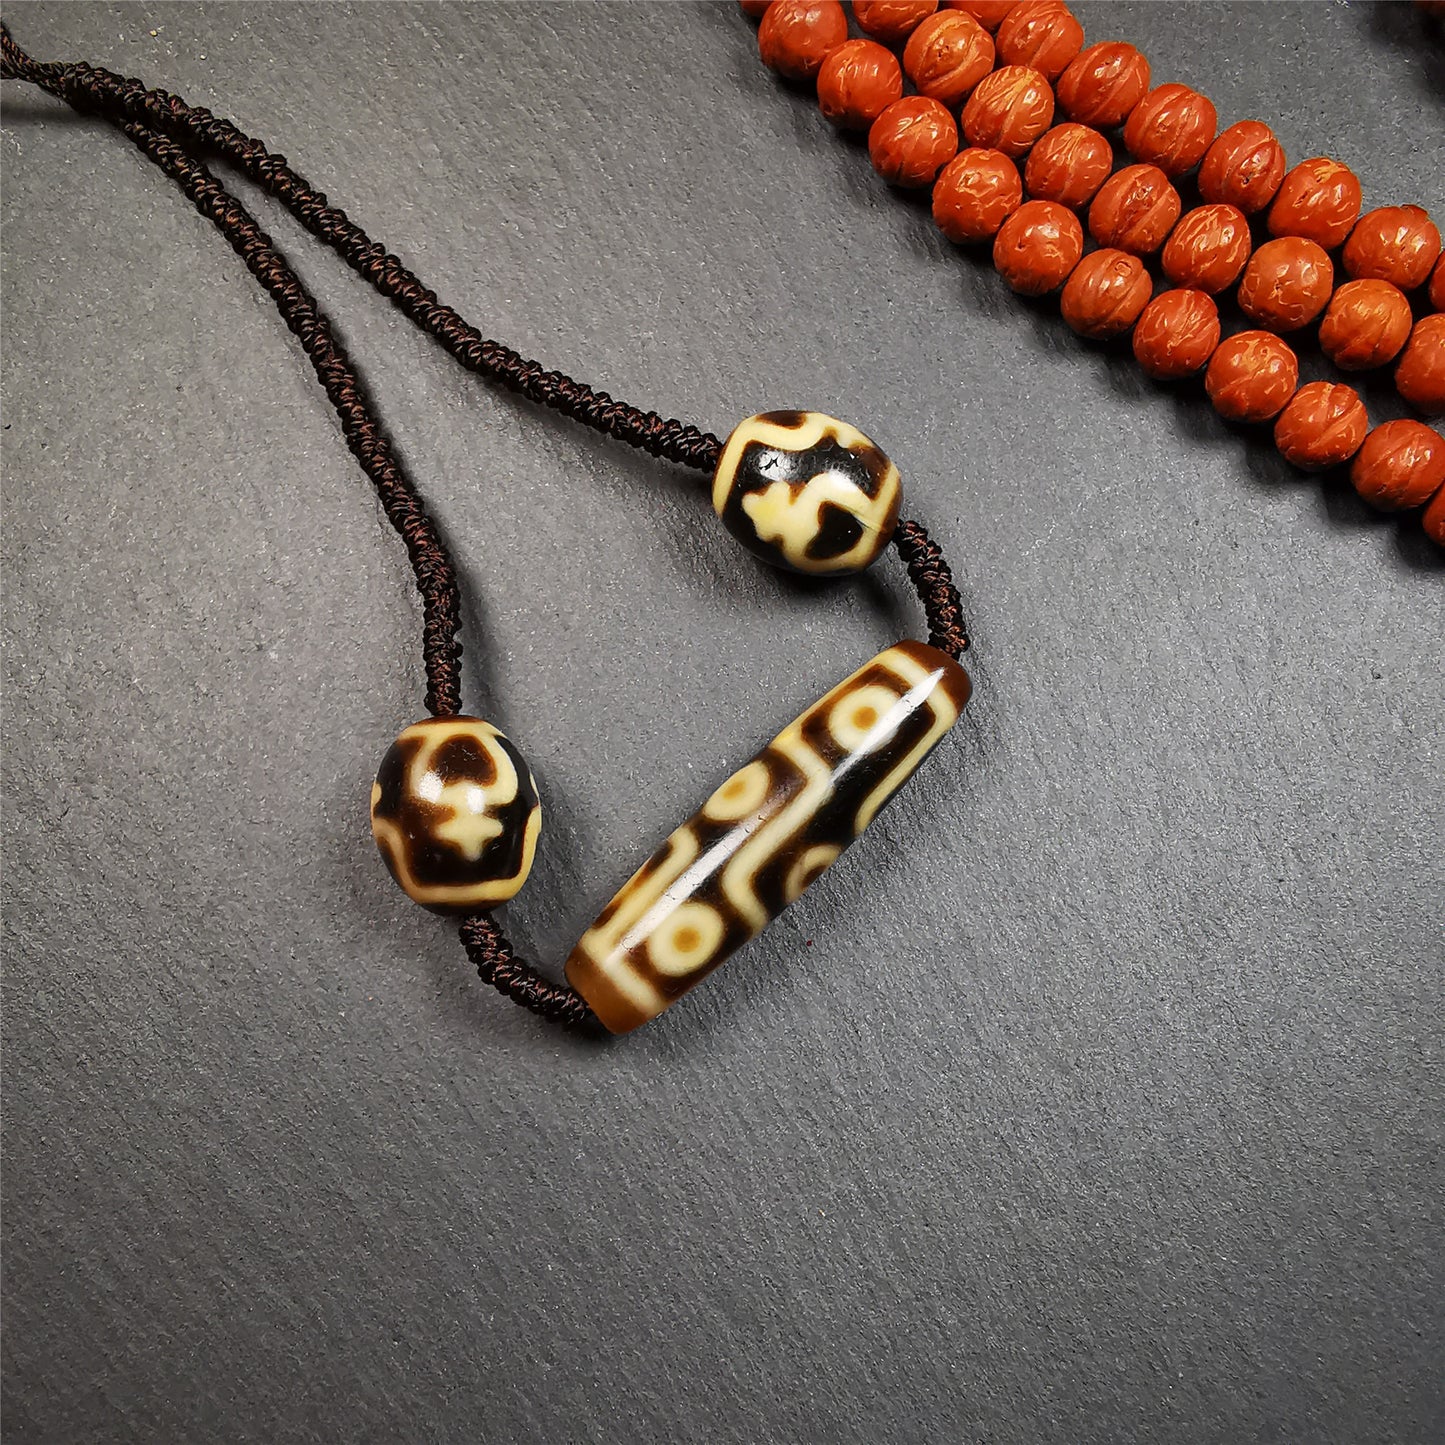 This necklace was hand-woven by Tibetans from Baiyu County, the main bead is a 9-eye dzi, paired with 2 treasure vase dalo dzi beads,about 30 years old. It can be worn not only as a fashionable accessory but also holds cultural and religious significance.